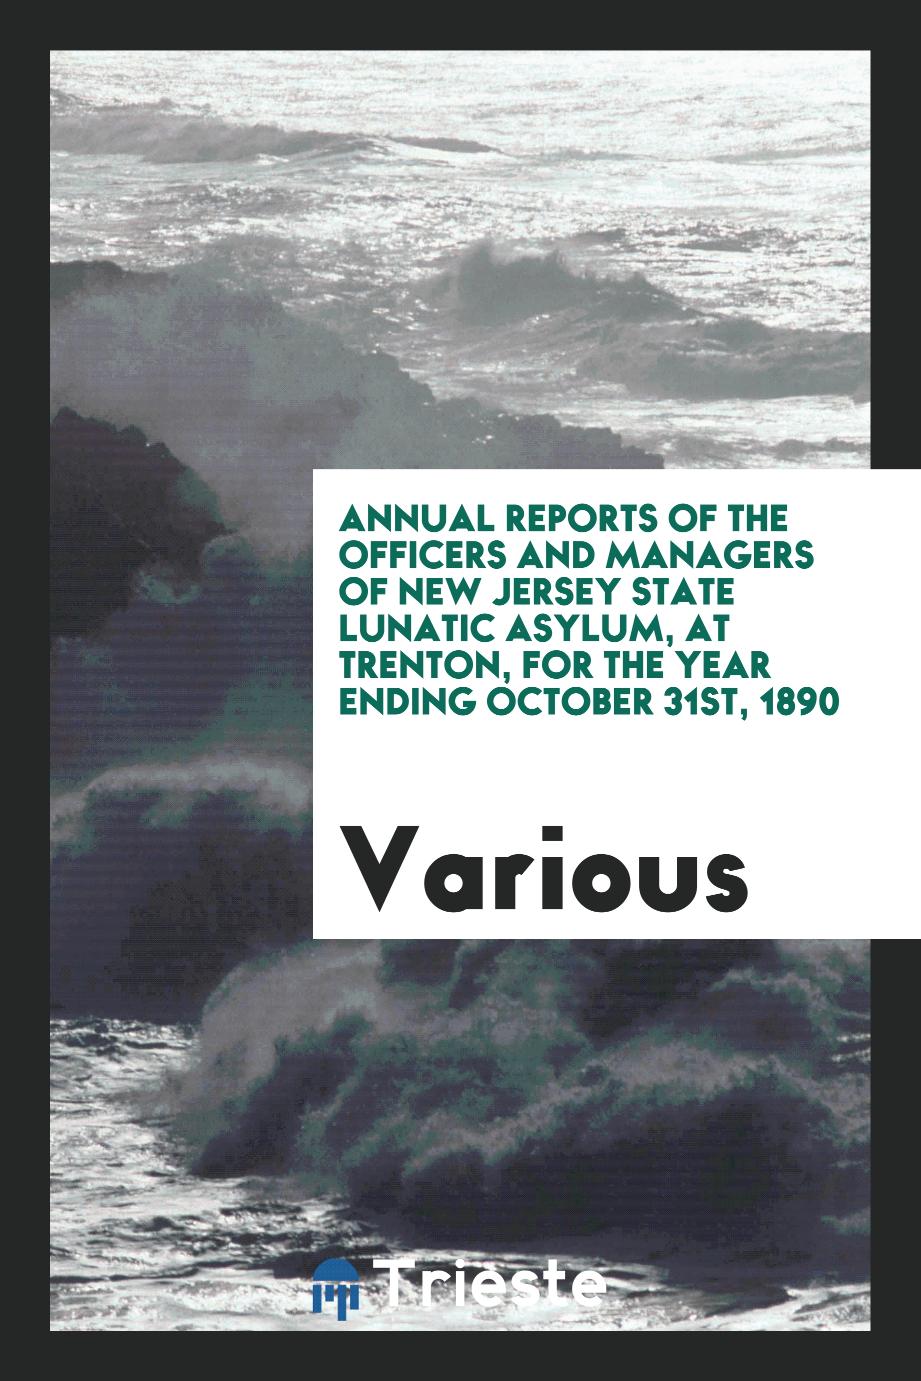 Annual reports of the officers and managers of New Jersey State Lunatic Asylum, at trenton, for the year ending October 31st, 1890